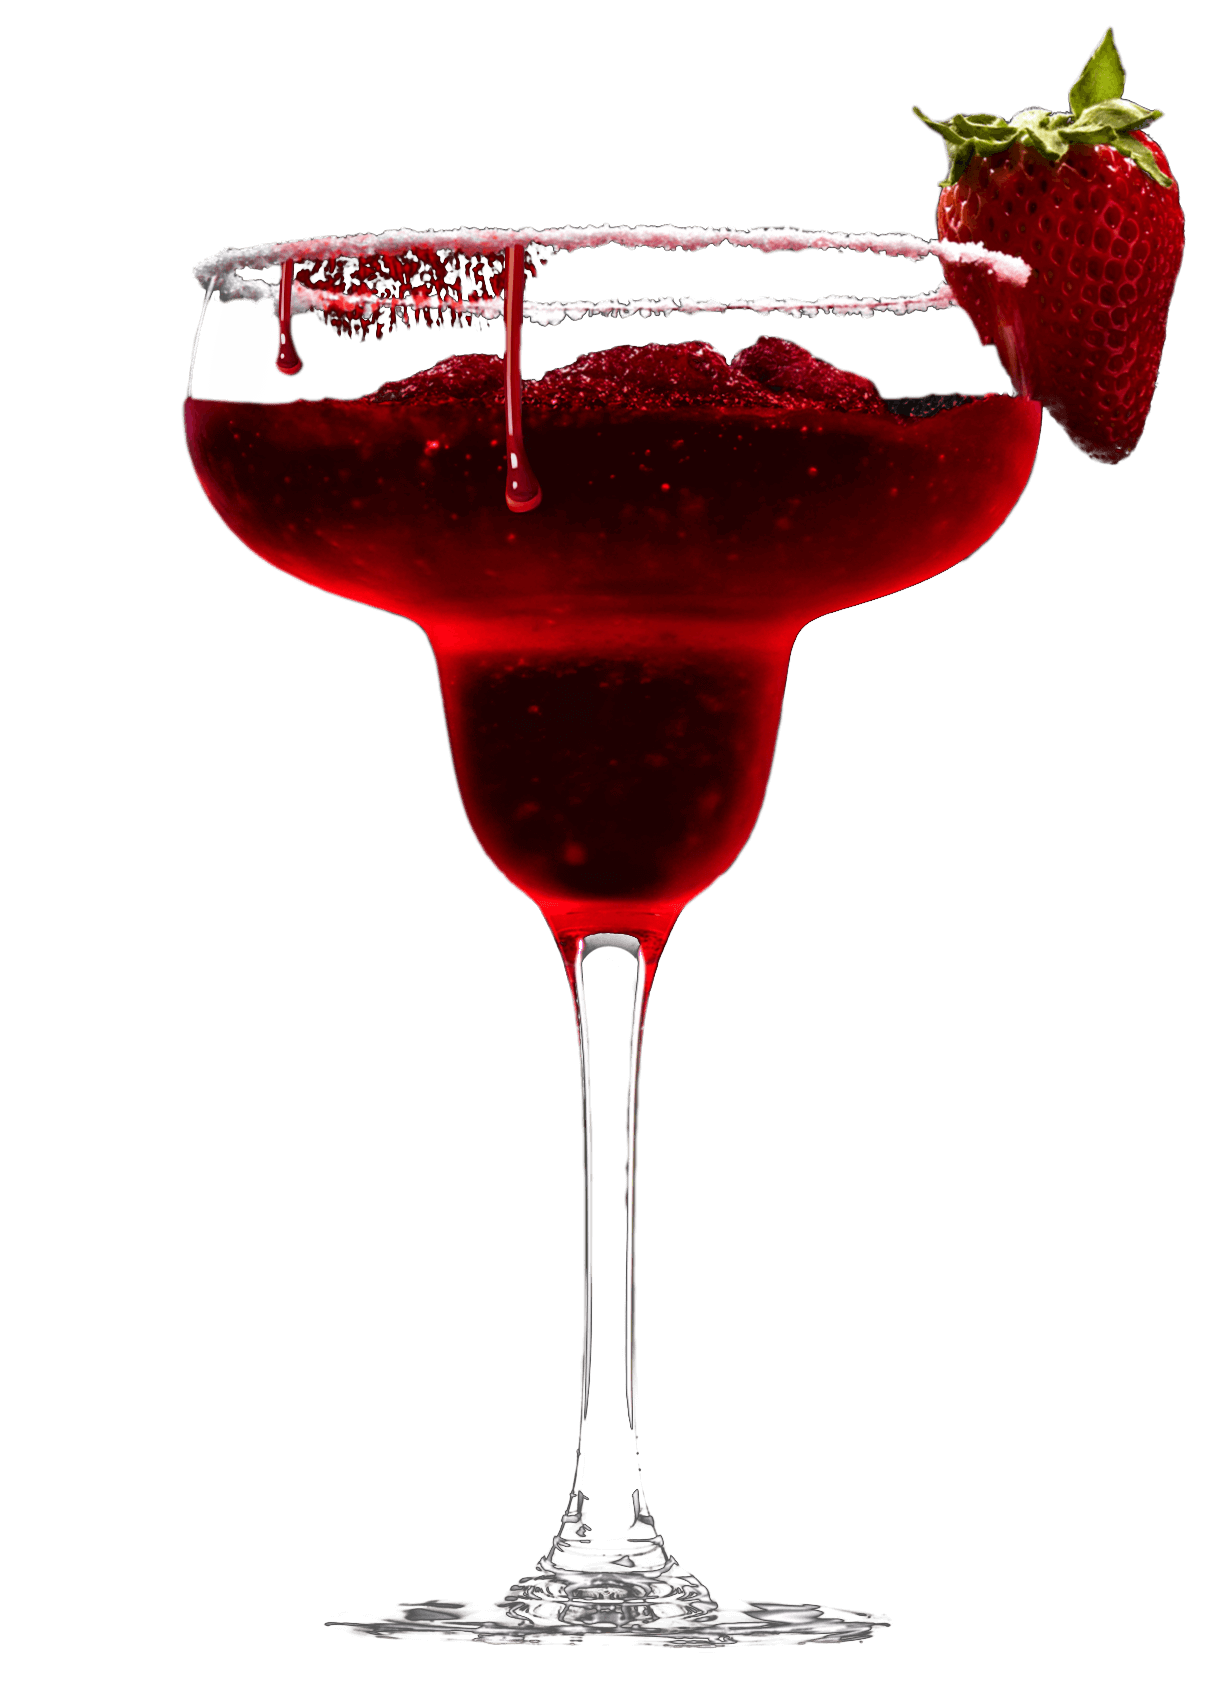 A cocktail glass filled with a red liquid.